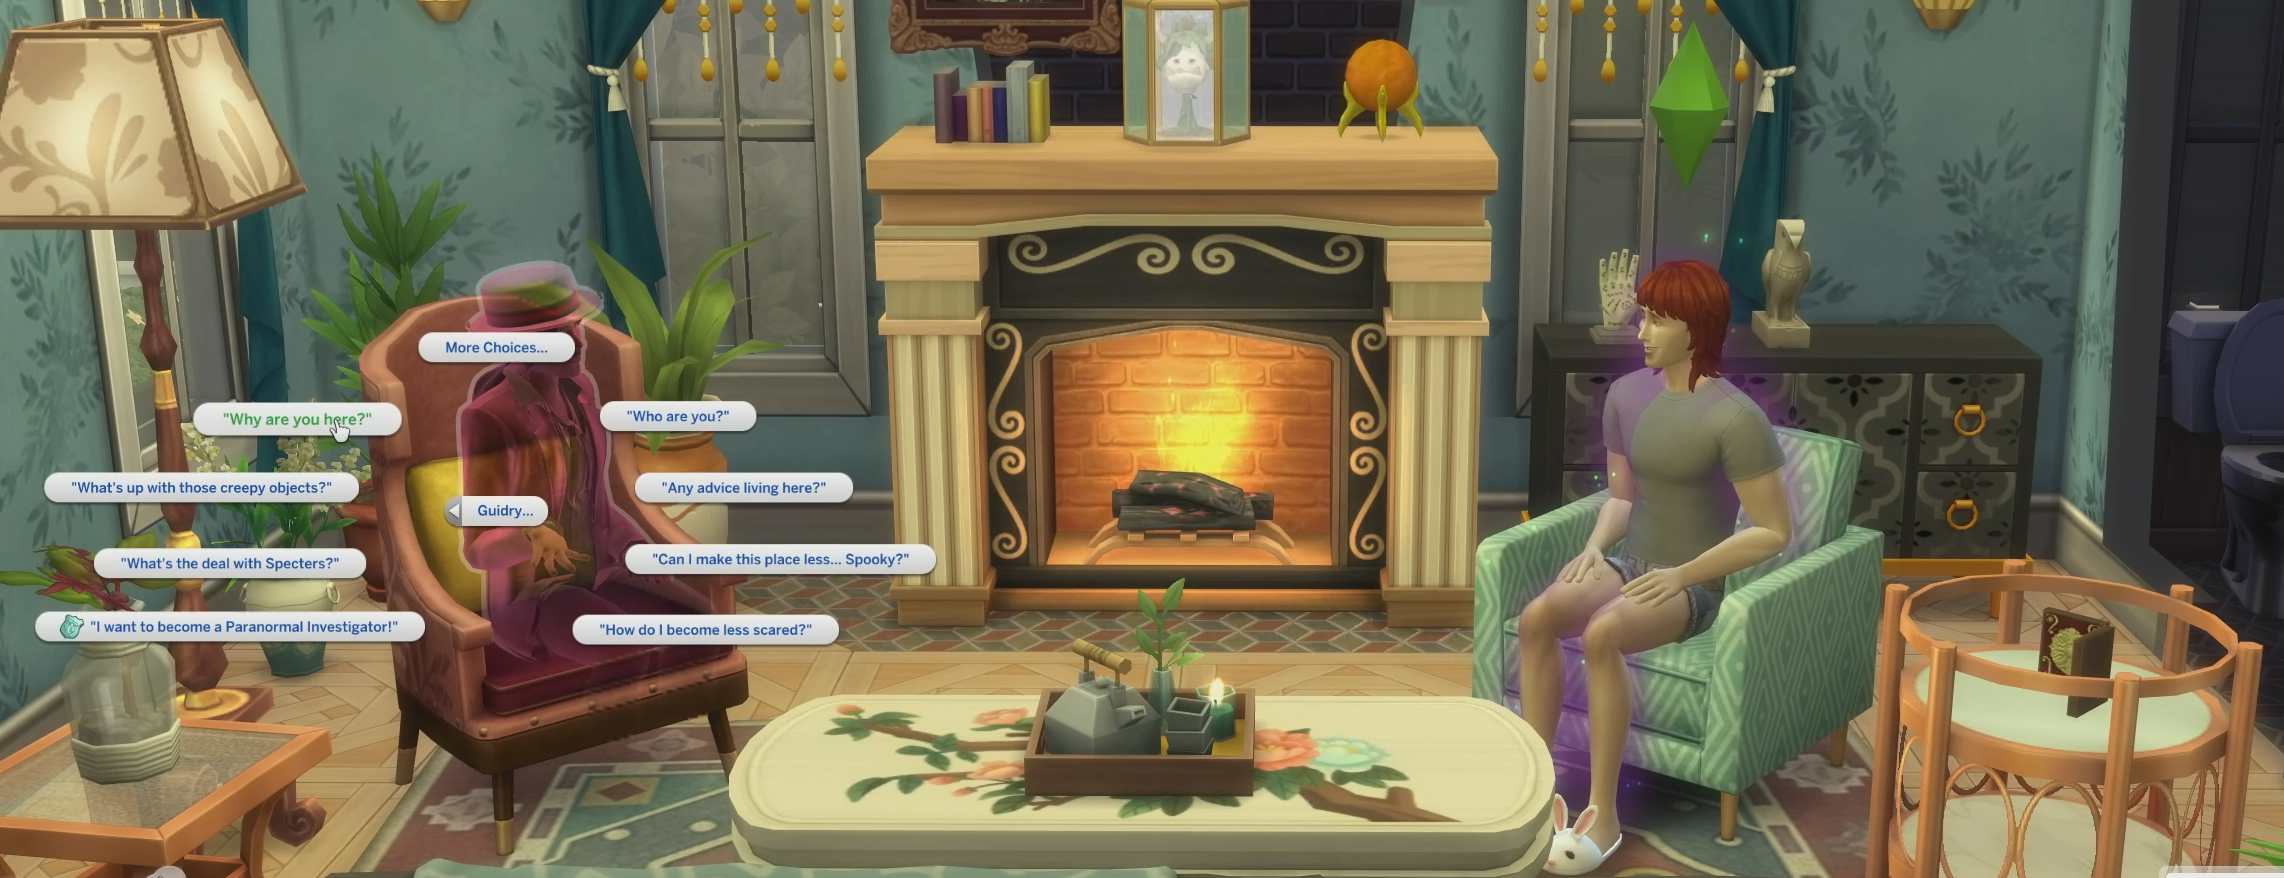 The Sims 4 Paranormal Stuff Pack Gameplay - The Sim Architect